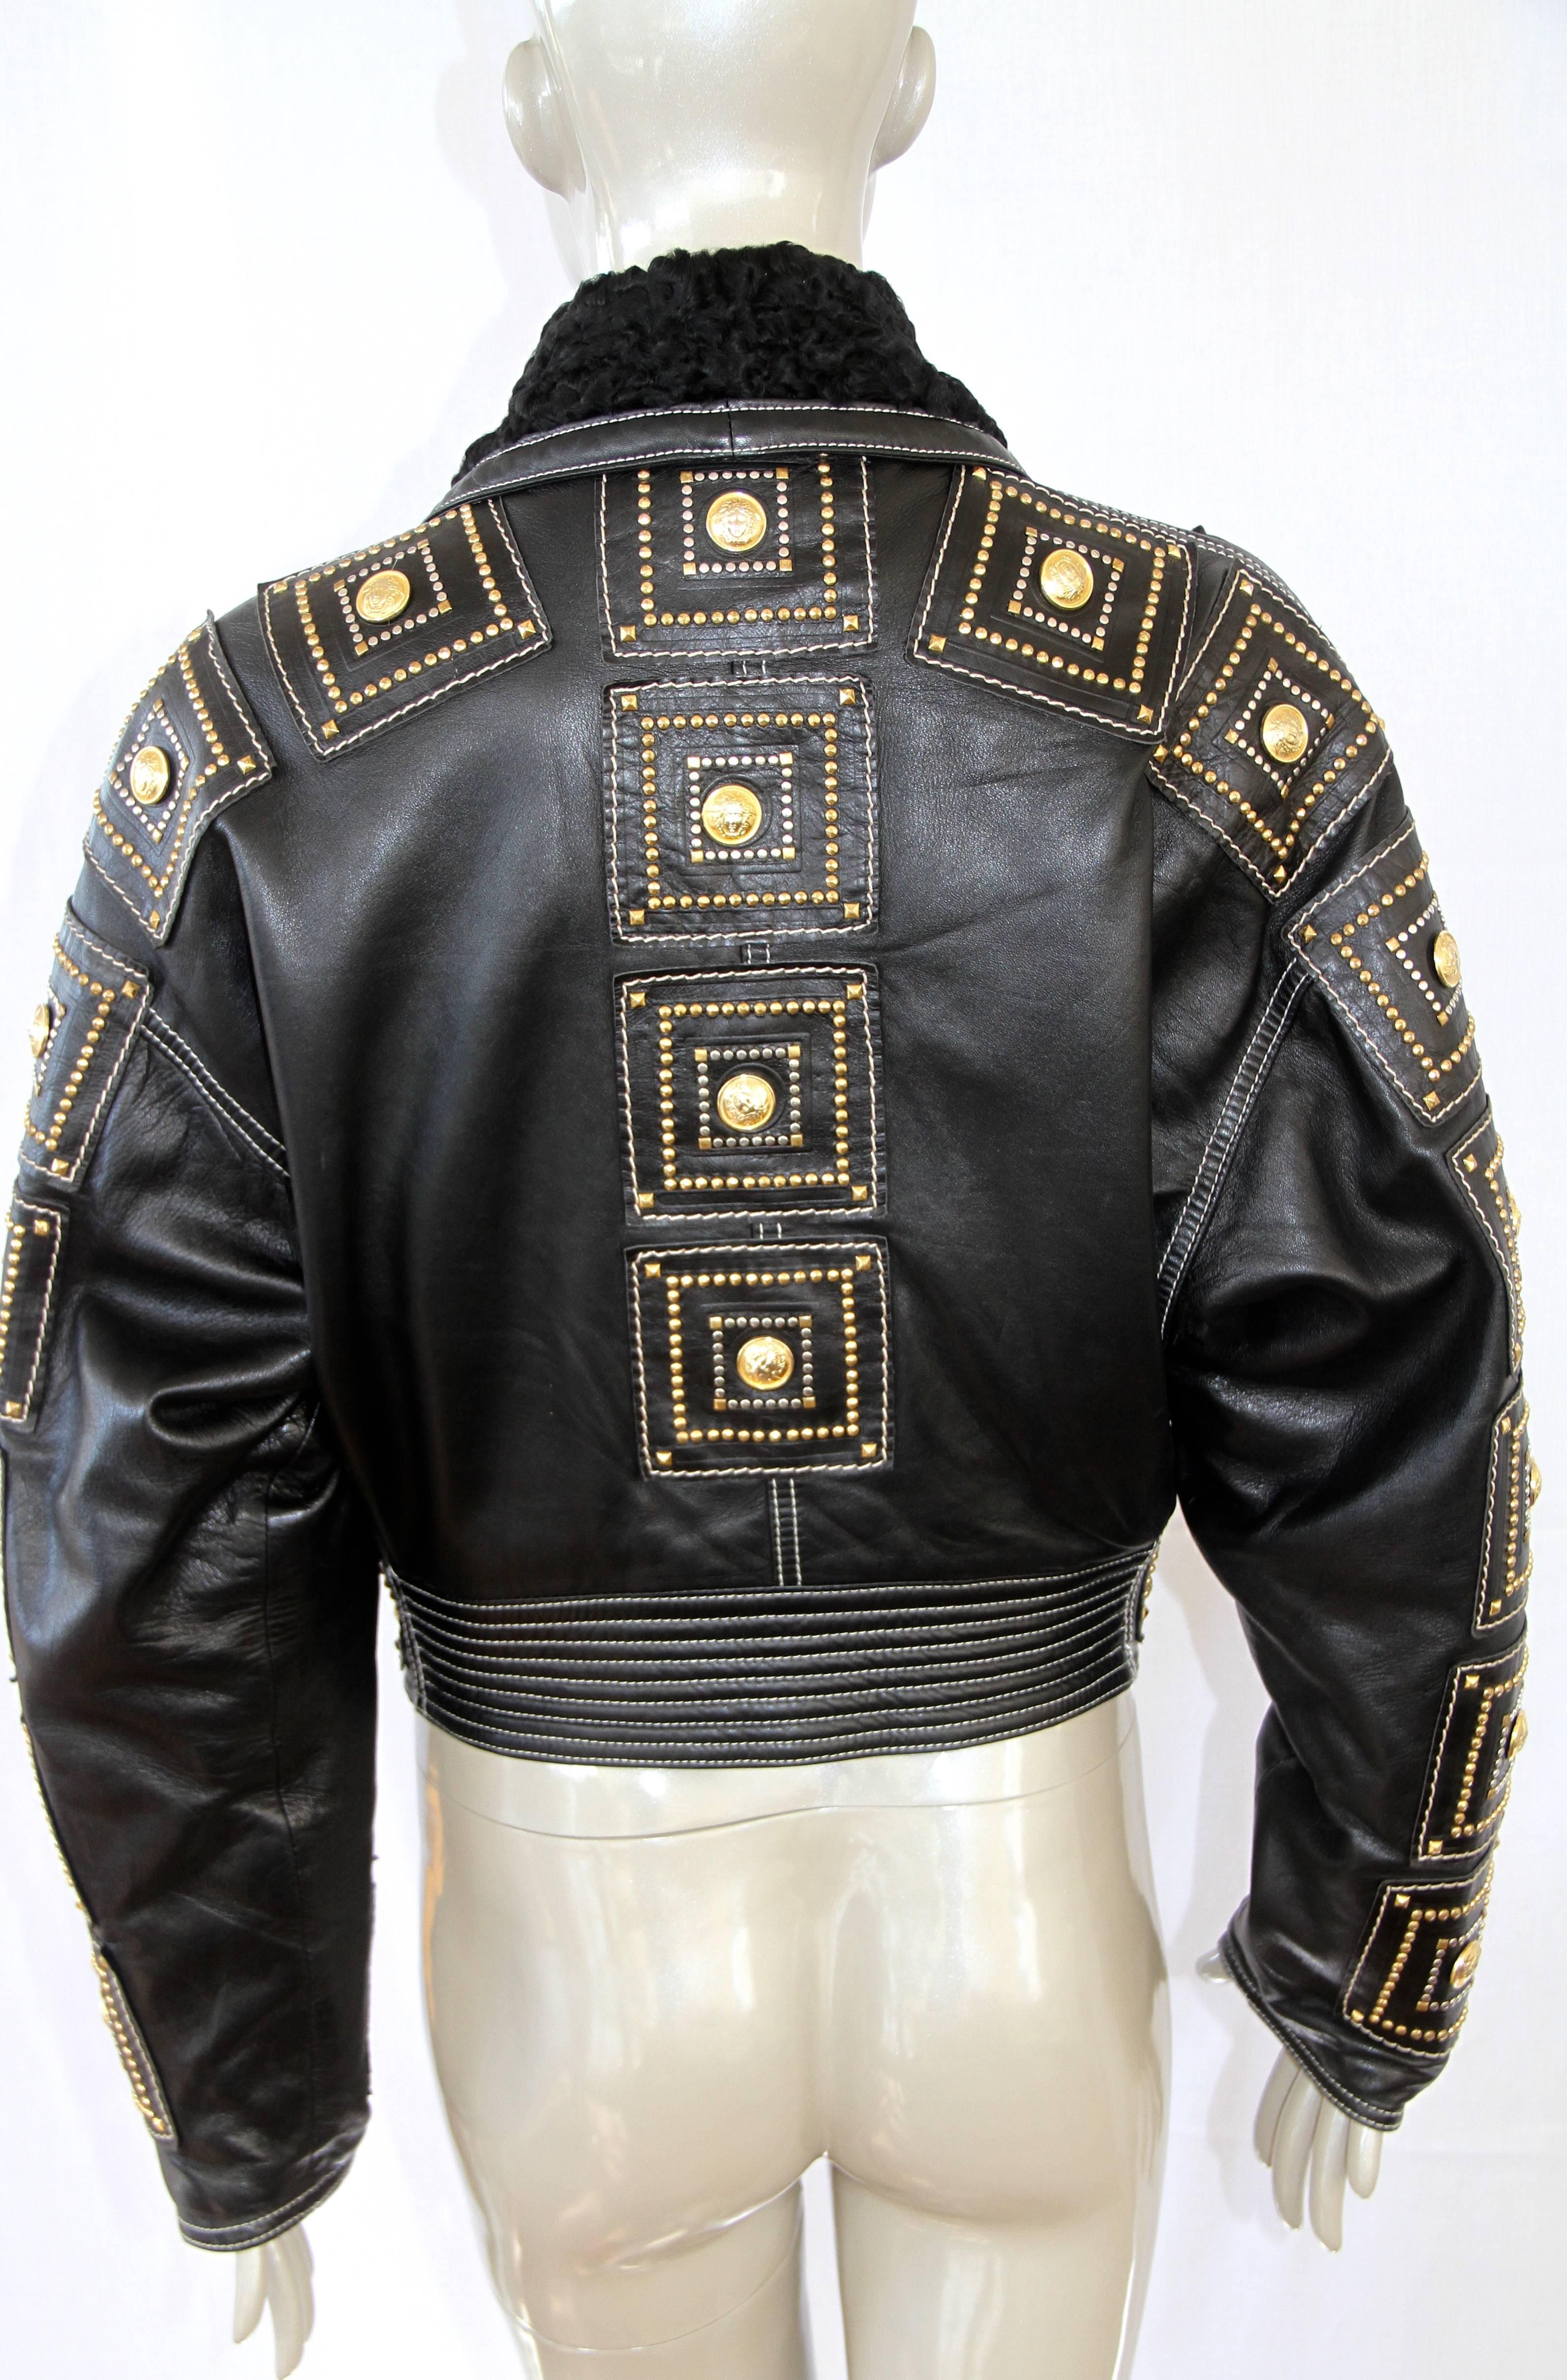 Museum Quality Gianni Versace Medusa Studded Jacket Fall 1992 In Excellent Condition For Sale In W1, GB